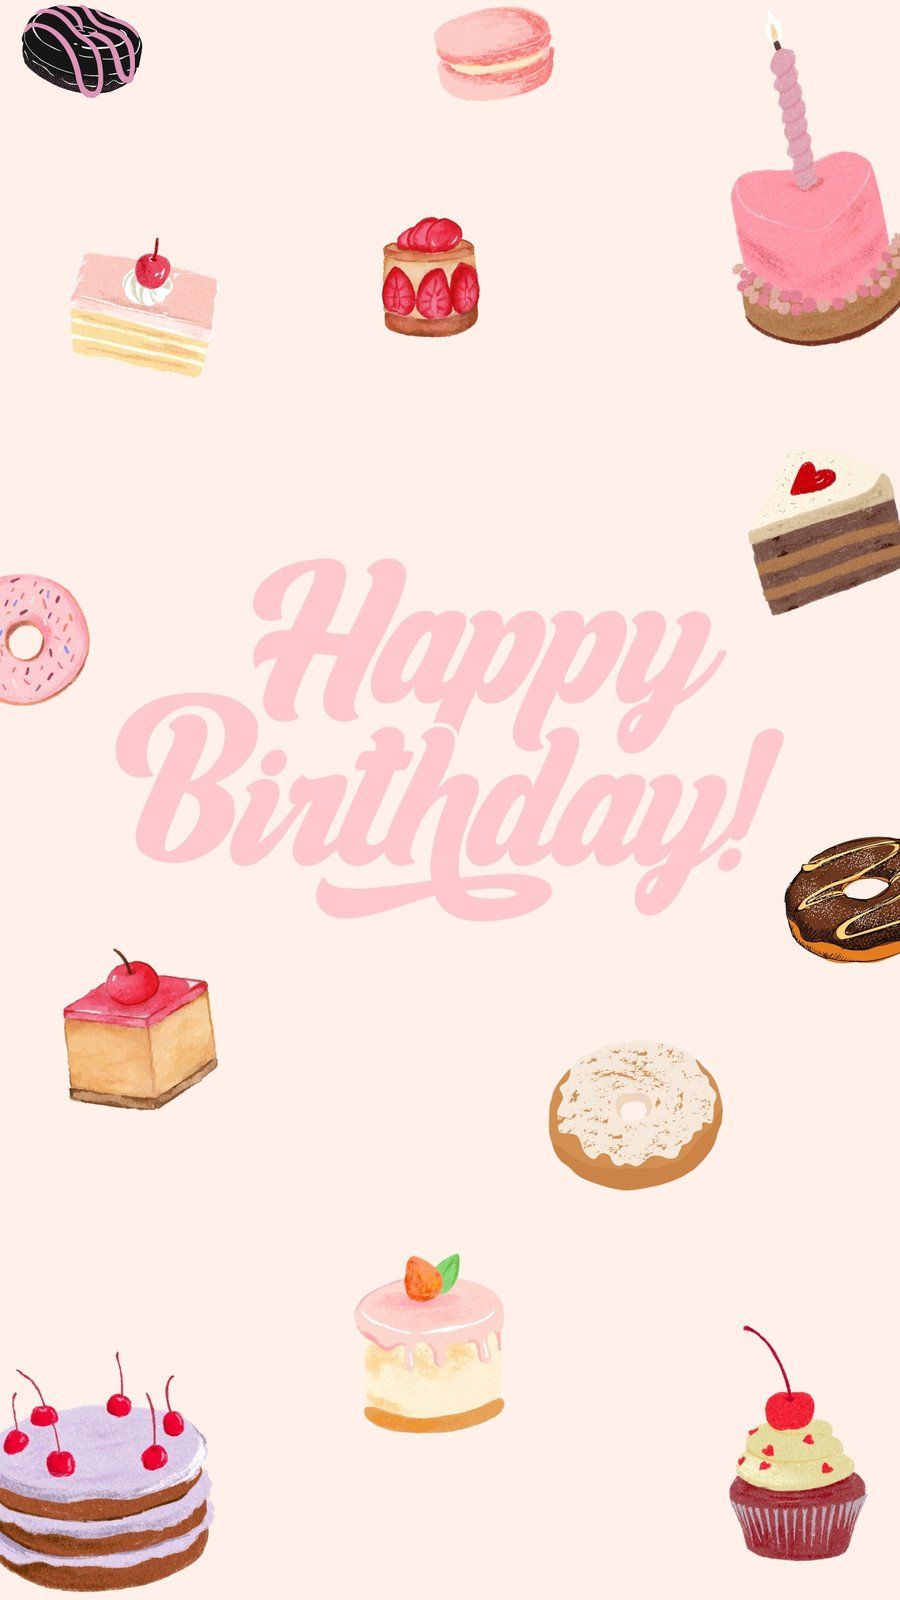 Happy birthday cake wallpaper for mobiles and tablets - Cake